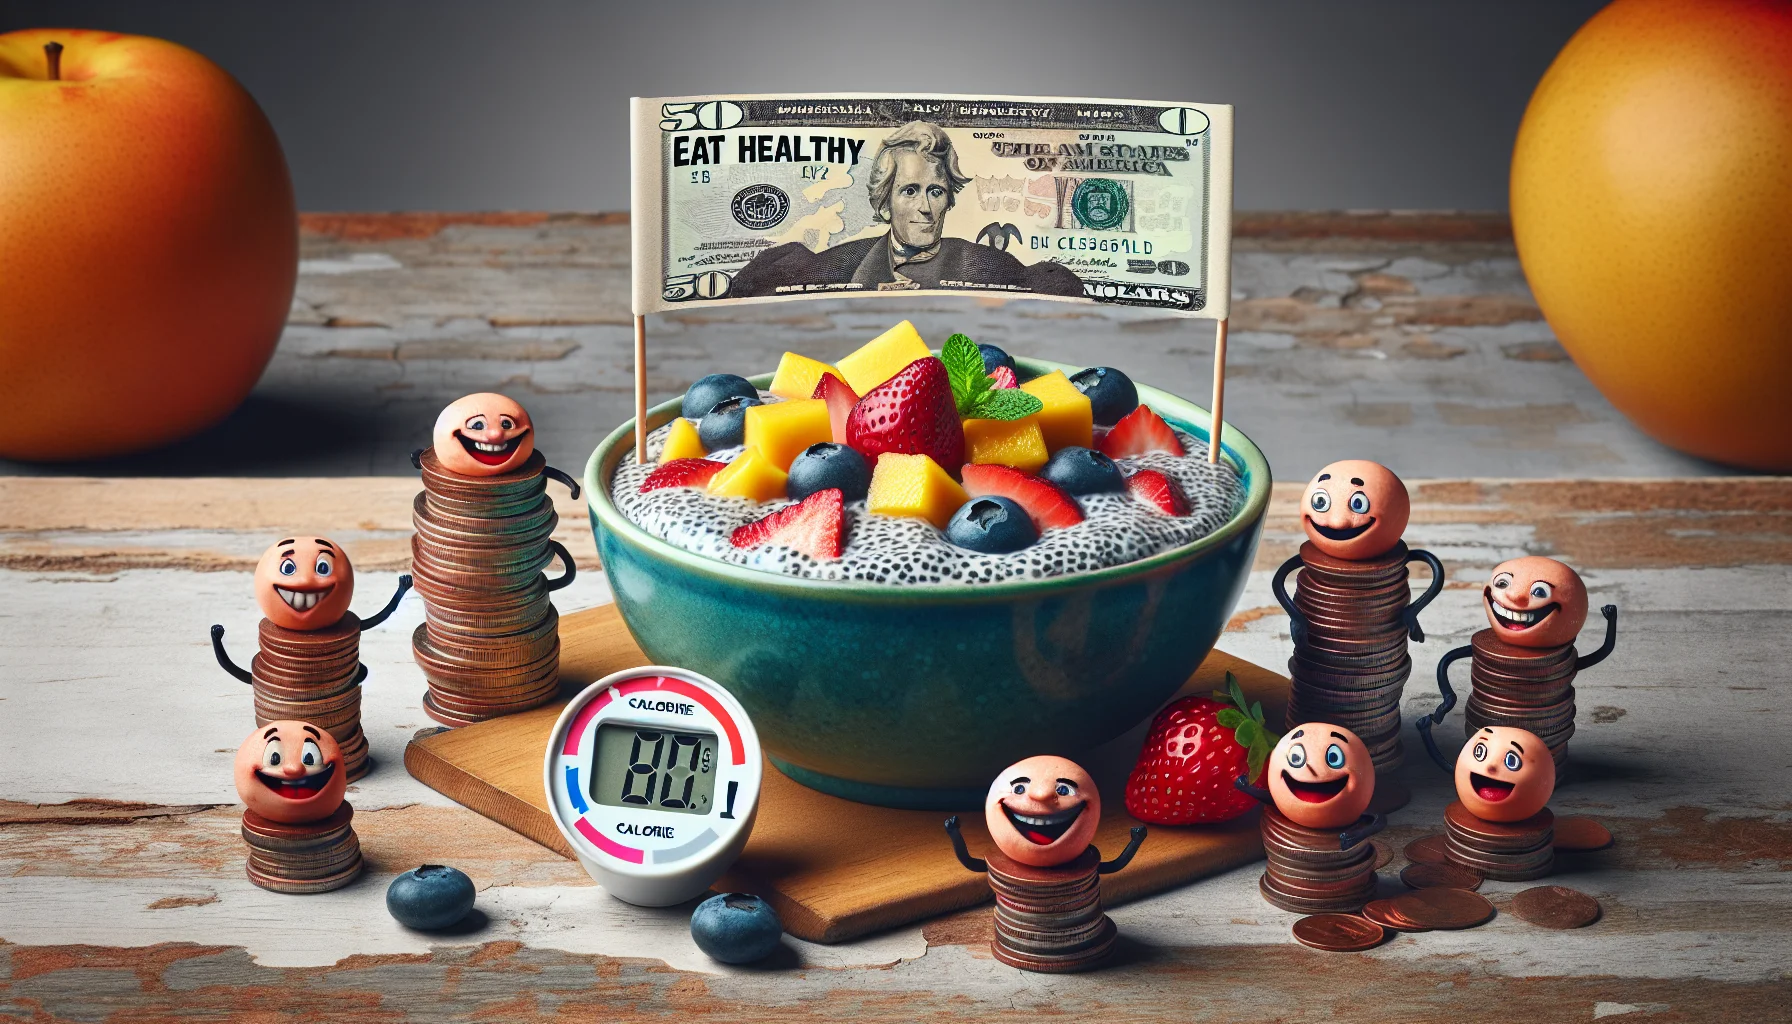 A fun, whimsical scenario: A bowl filled with chia seed pudding, complete with colorful fruits like strawberries, blueberries, and chunks of mango. Around the bowl, you see some mini animated dollar bills and pennies, smiling cheerfully, performing a little dance. On the side, a small calorie counter is displaying a surprisingly low number, contributing to the joyous atmosphere. A banner overhead reads, 'Eat Healthy, Save Money!' All are placed on a rustic wooden table enhancing the natural aspect of the meal. The entire picture emits a positive, healthy, and cost-saving vibe.